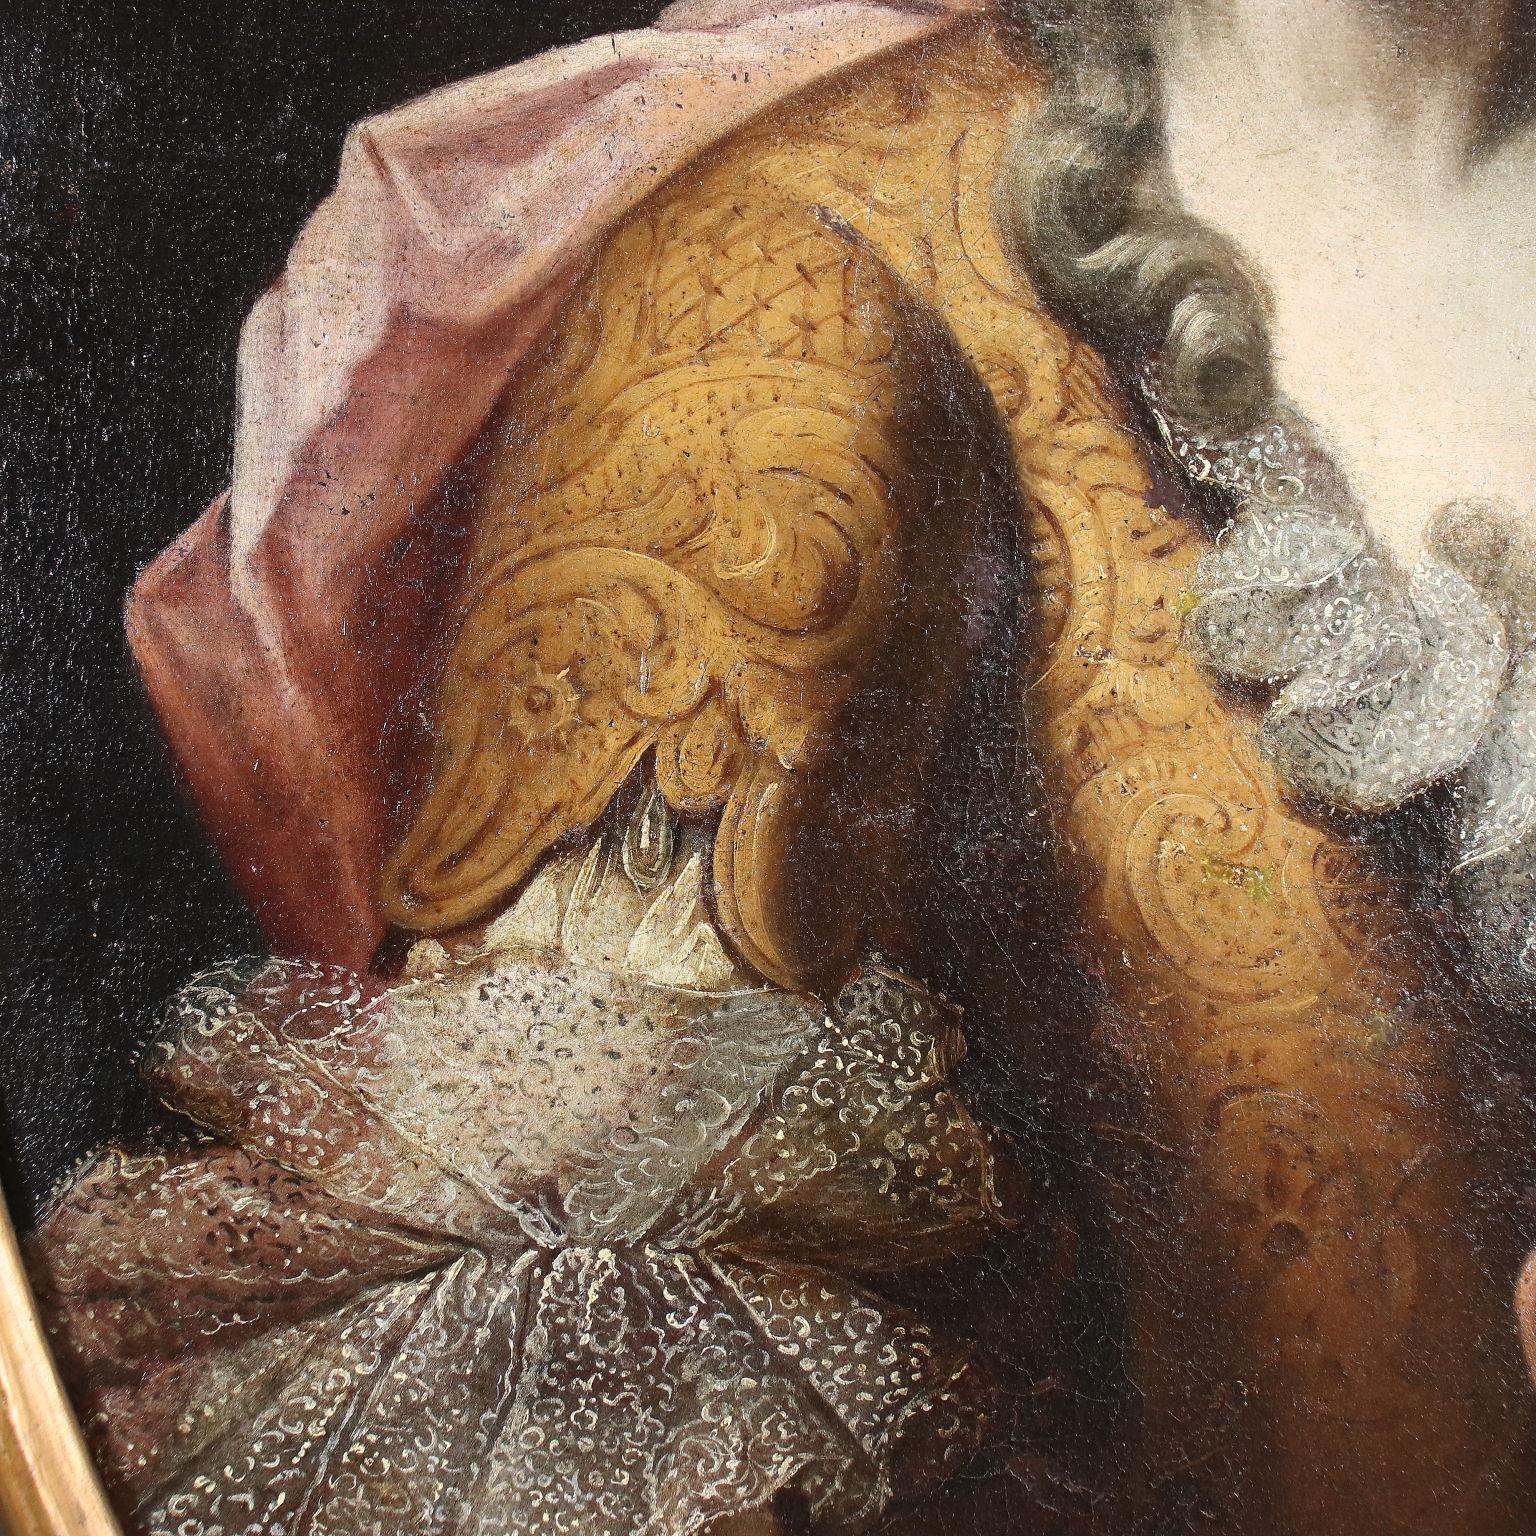 Oil painting on canvas. Lombard school. The oval portrait of the noblewoman highlights the richness of the damask corset and delicate lace but also the severe hairstyle and the rigid composure of the look and pose; the lady drapes a red cloak around